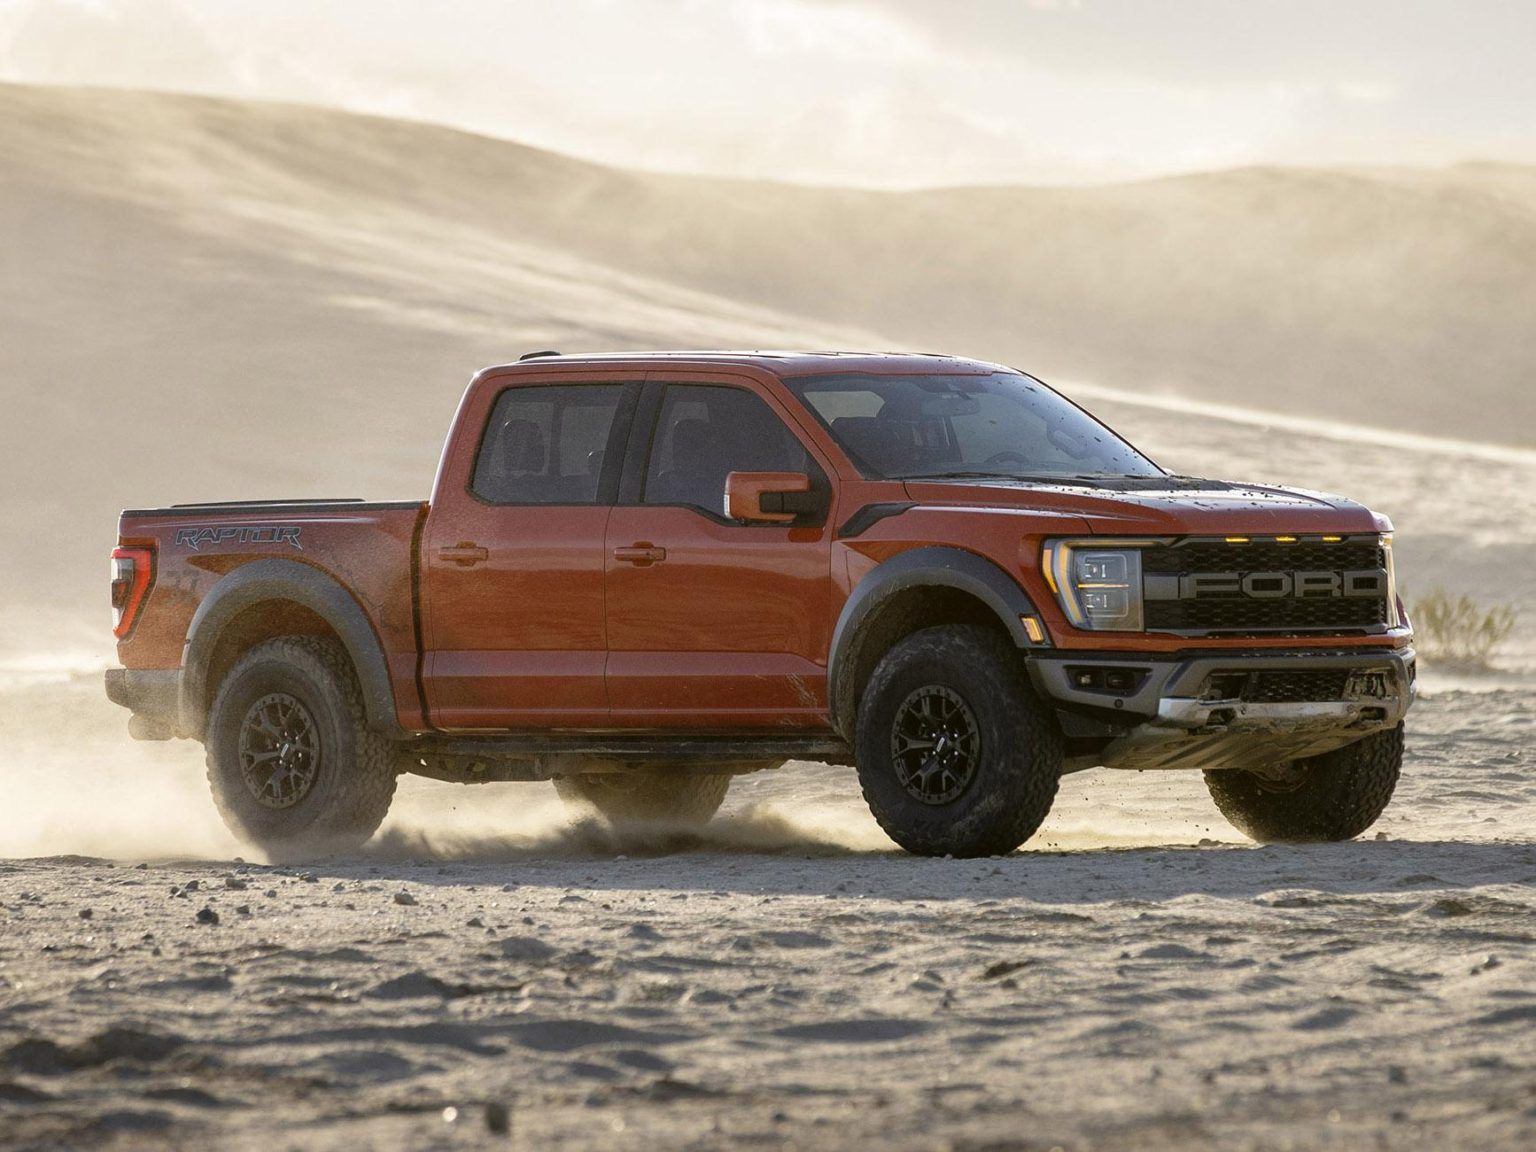 The next-gen 2021 Ford F-150 Raptor has just been revealed.